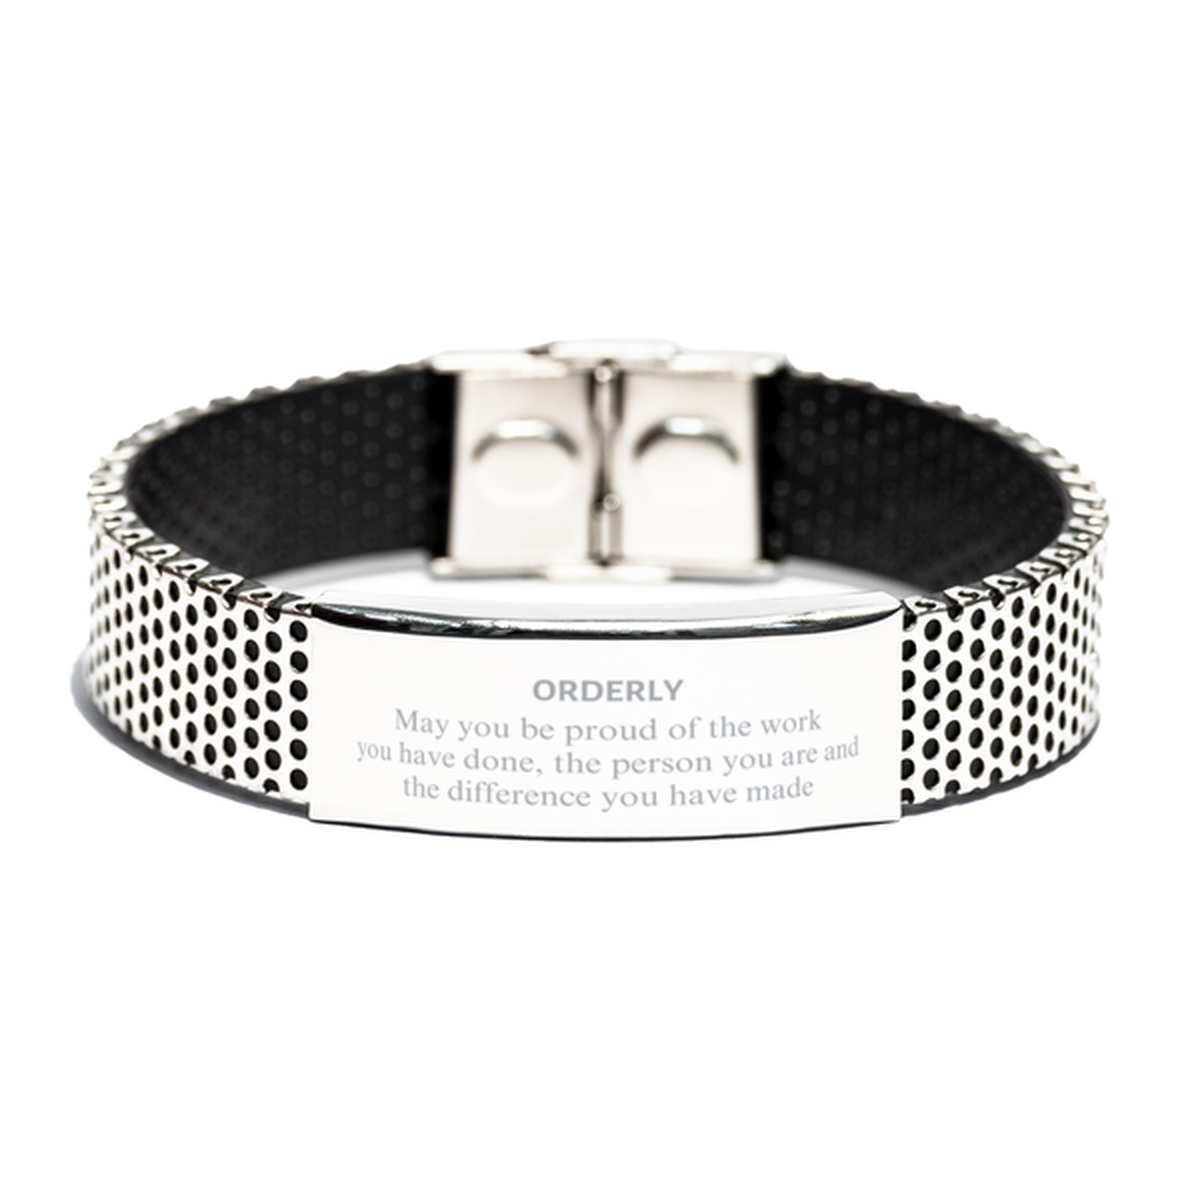 Orderly May you be proud of the work you have done, Retirement Orderly Stainless Steel Bracelet for Colleague Appreciation Gifts Amazing for Orderly